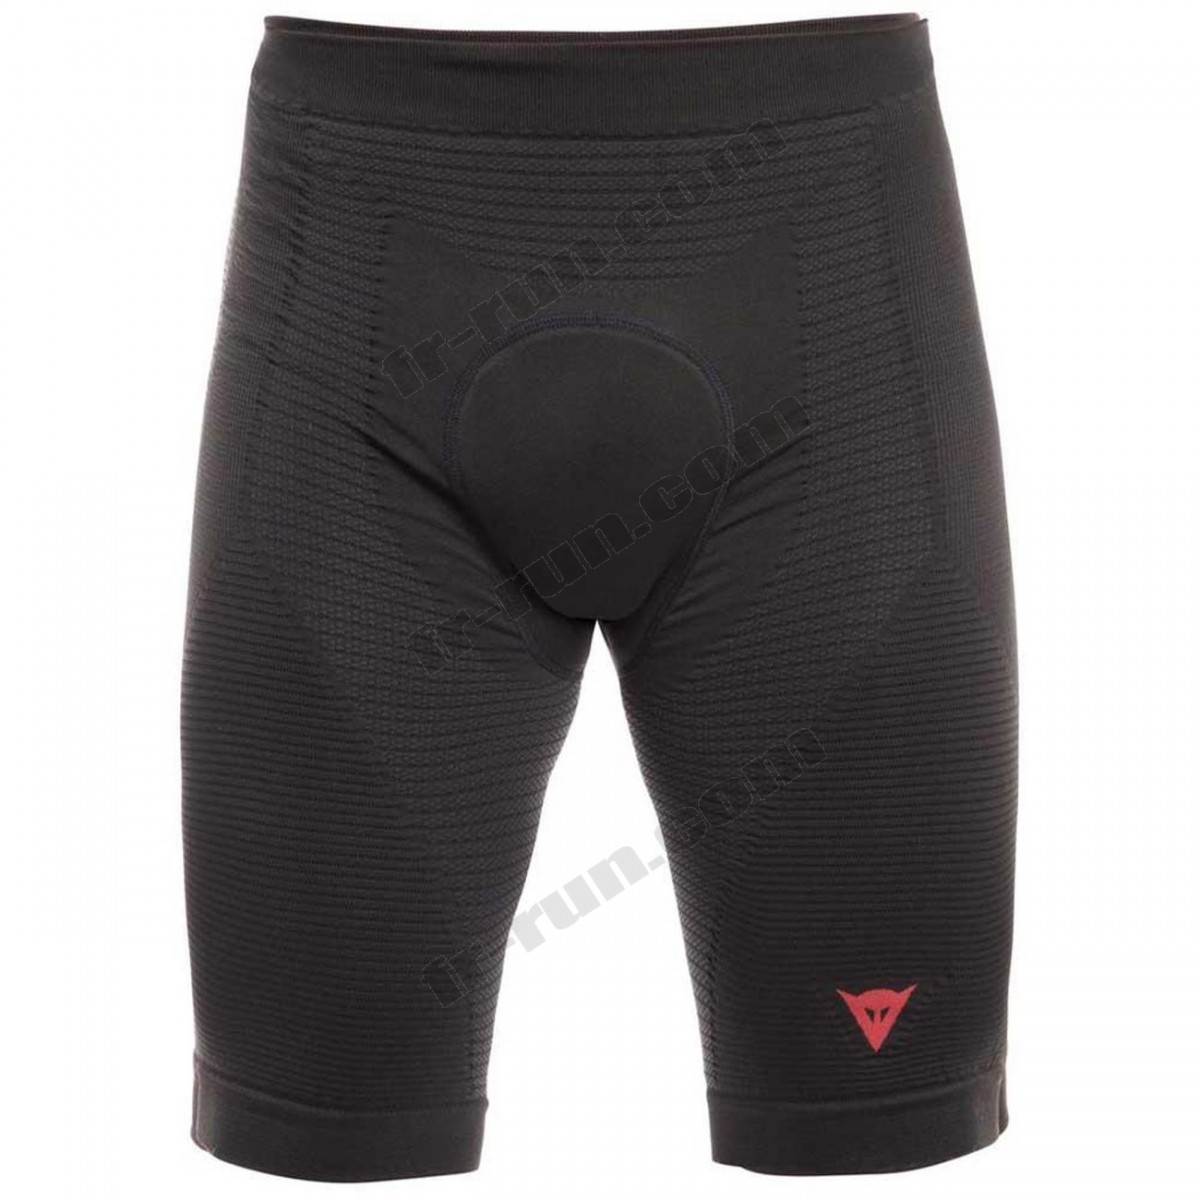 Dainese/Cycle homme DAINESE Dainese Trailknit Undershorts ◇◇◇ Pas Cher Du Tout - Dainese/Cycle homme DAINESE Dainese Trailknit Undershorts ◇◇◇ Pas Cher Du Tout